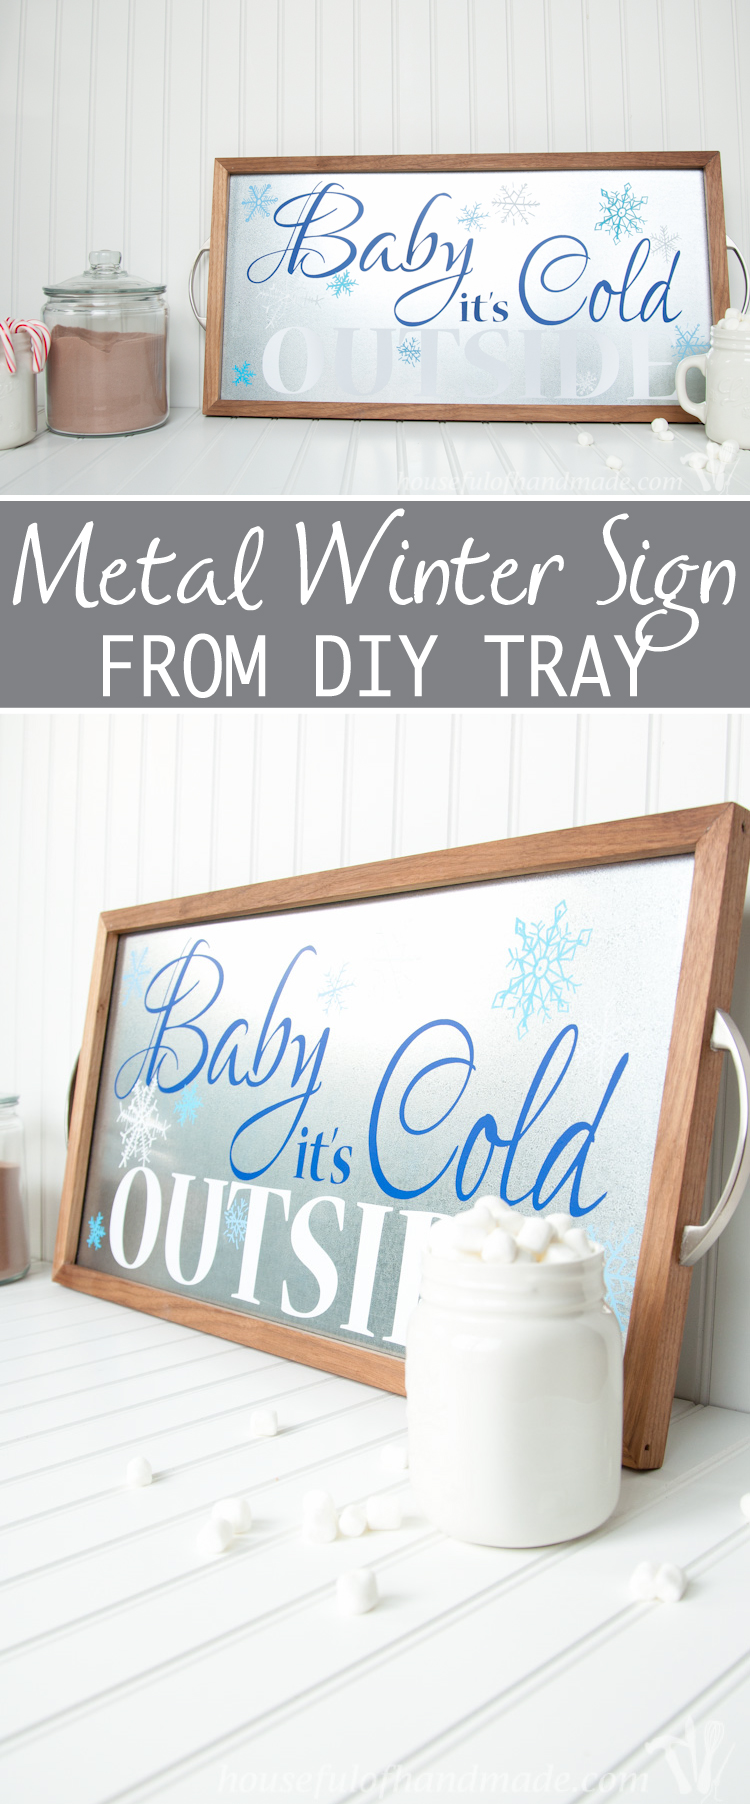 Baby It's Cold Outside is the perfect sign for a hot cocoa or coffee bar. Make this beautiful metal Winter Sign from DIY tray to add a little sparkle to it! | OHMY-CREATIVE.COM